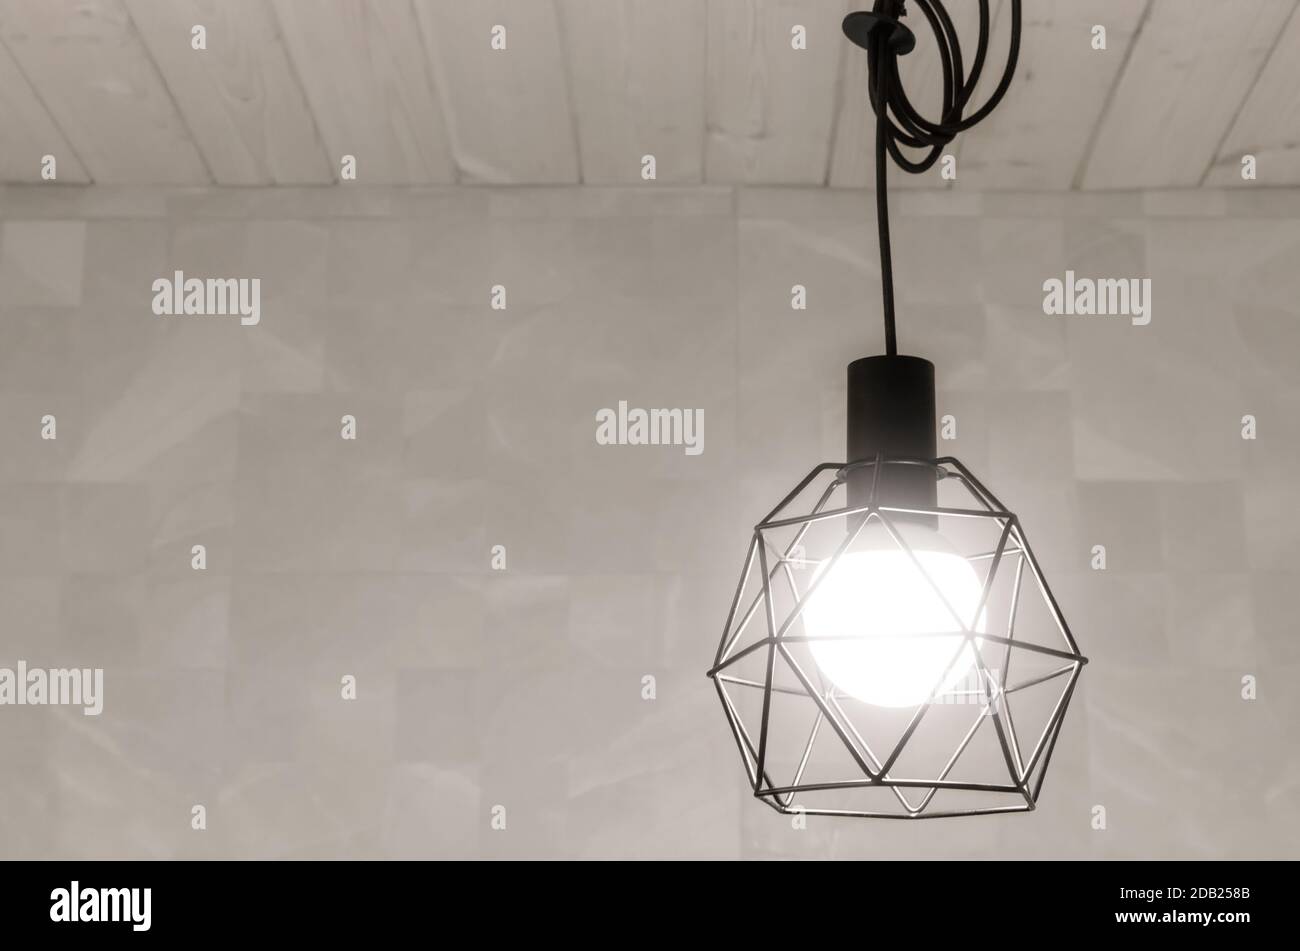 Ikea Lamp High Resolution Stock Photography and Images - Alamy